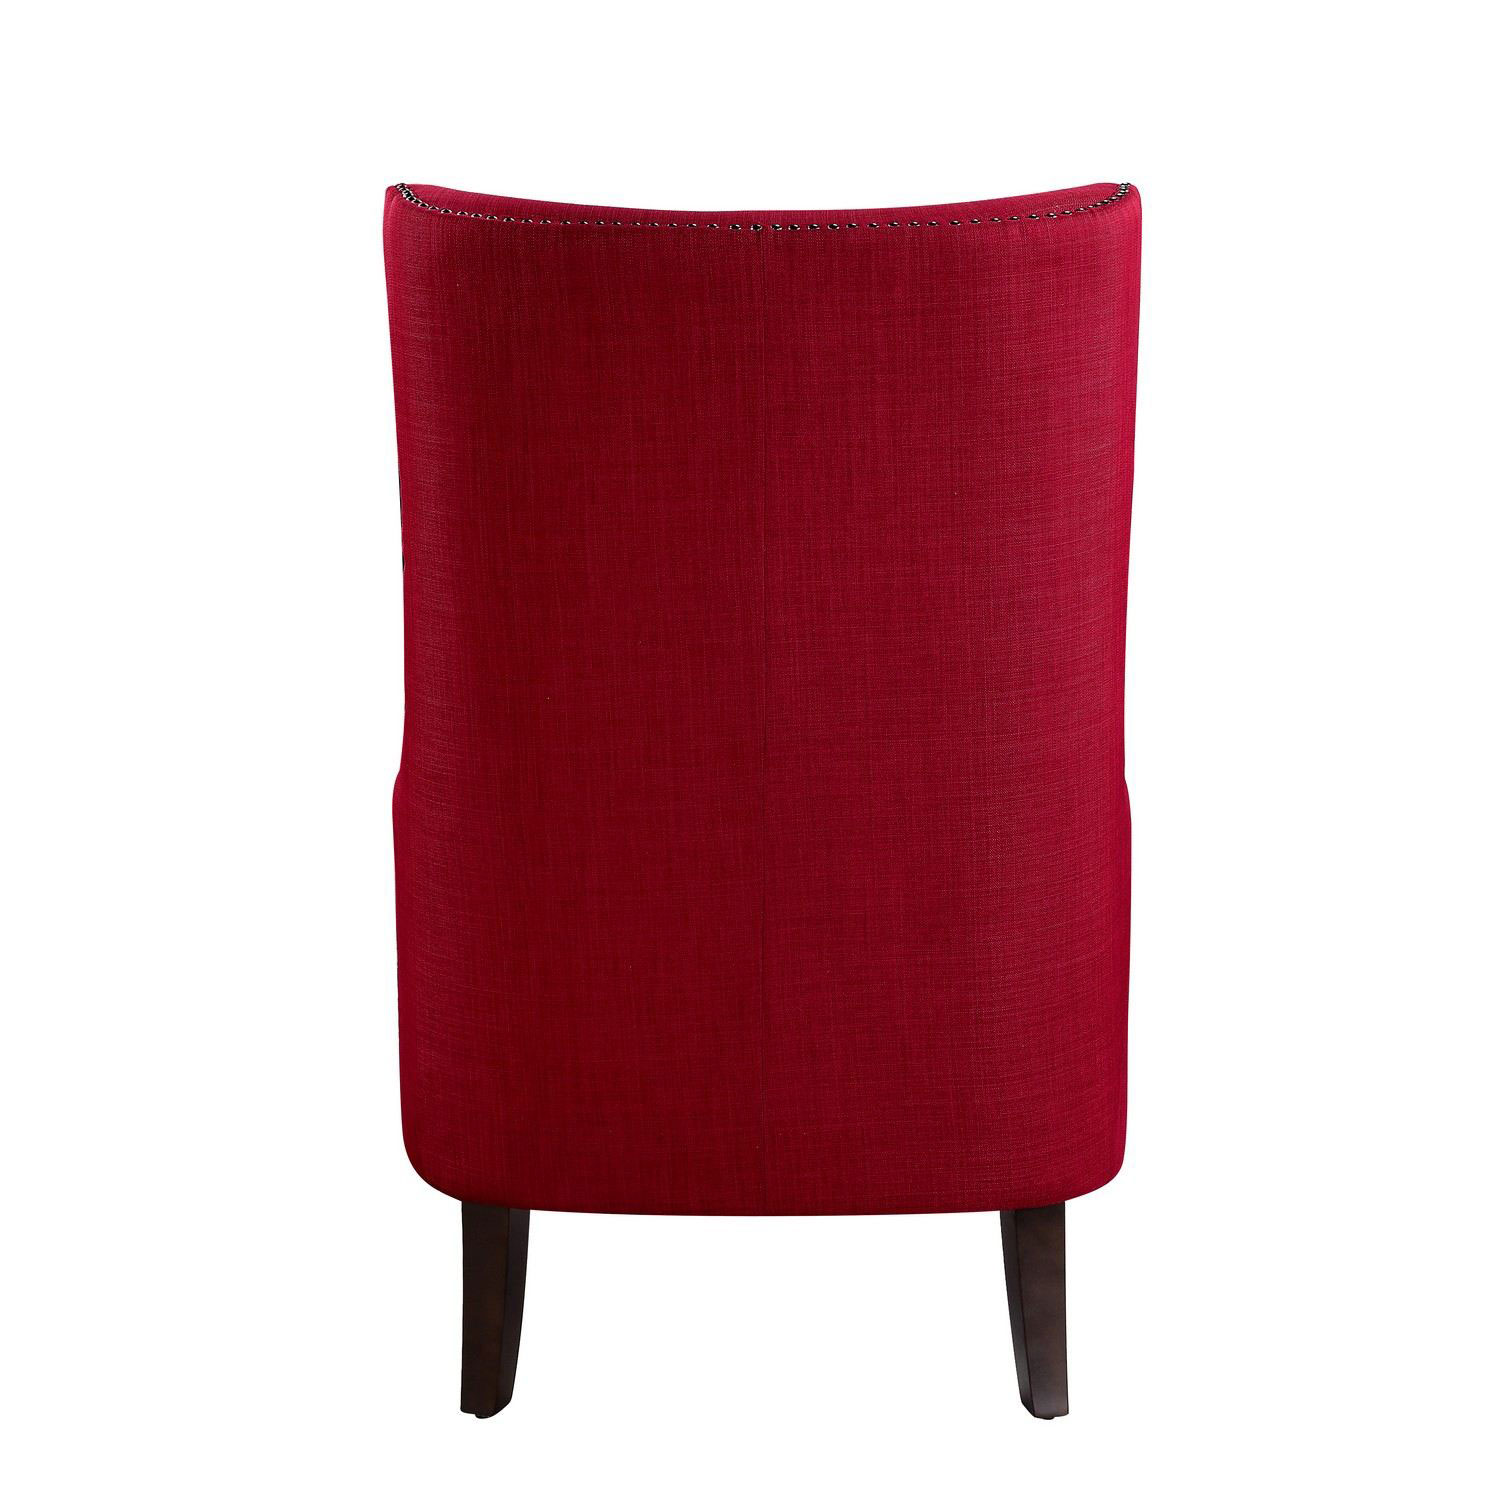 Homelegance Avina Accent Chair - Red